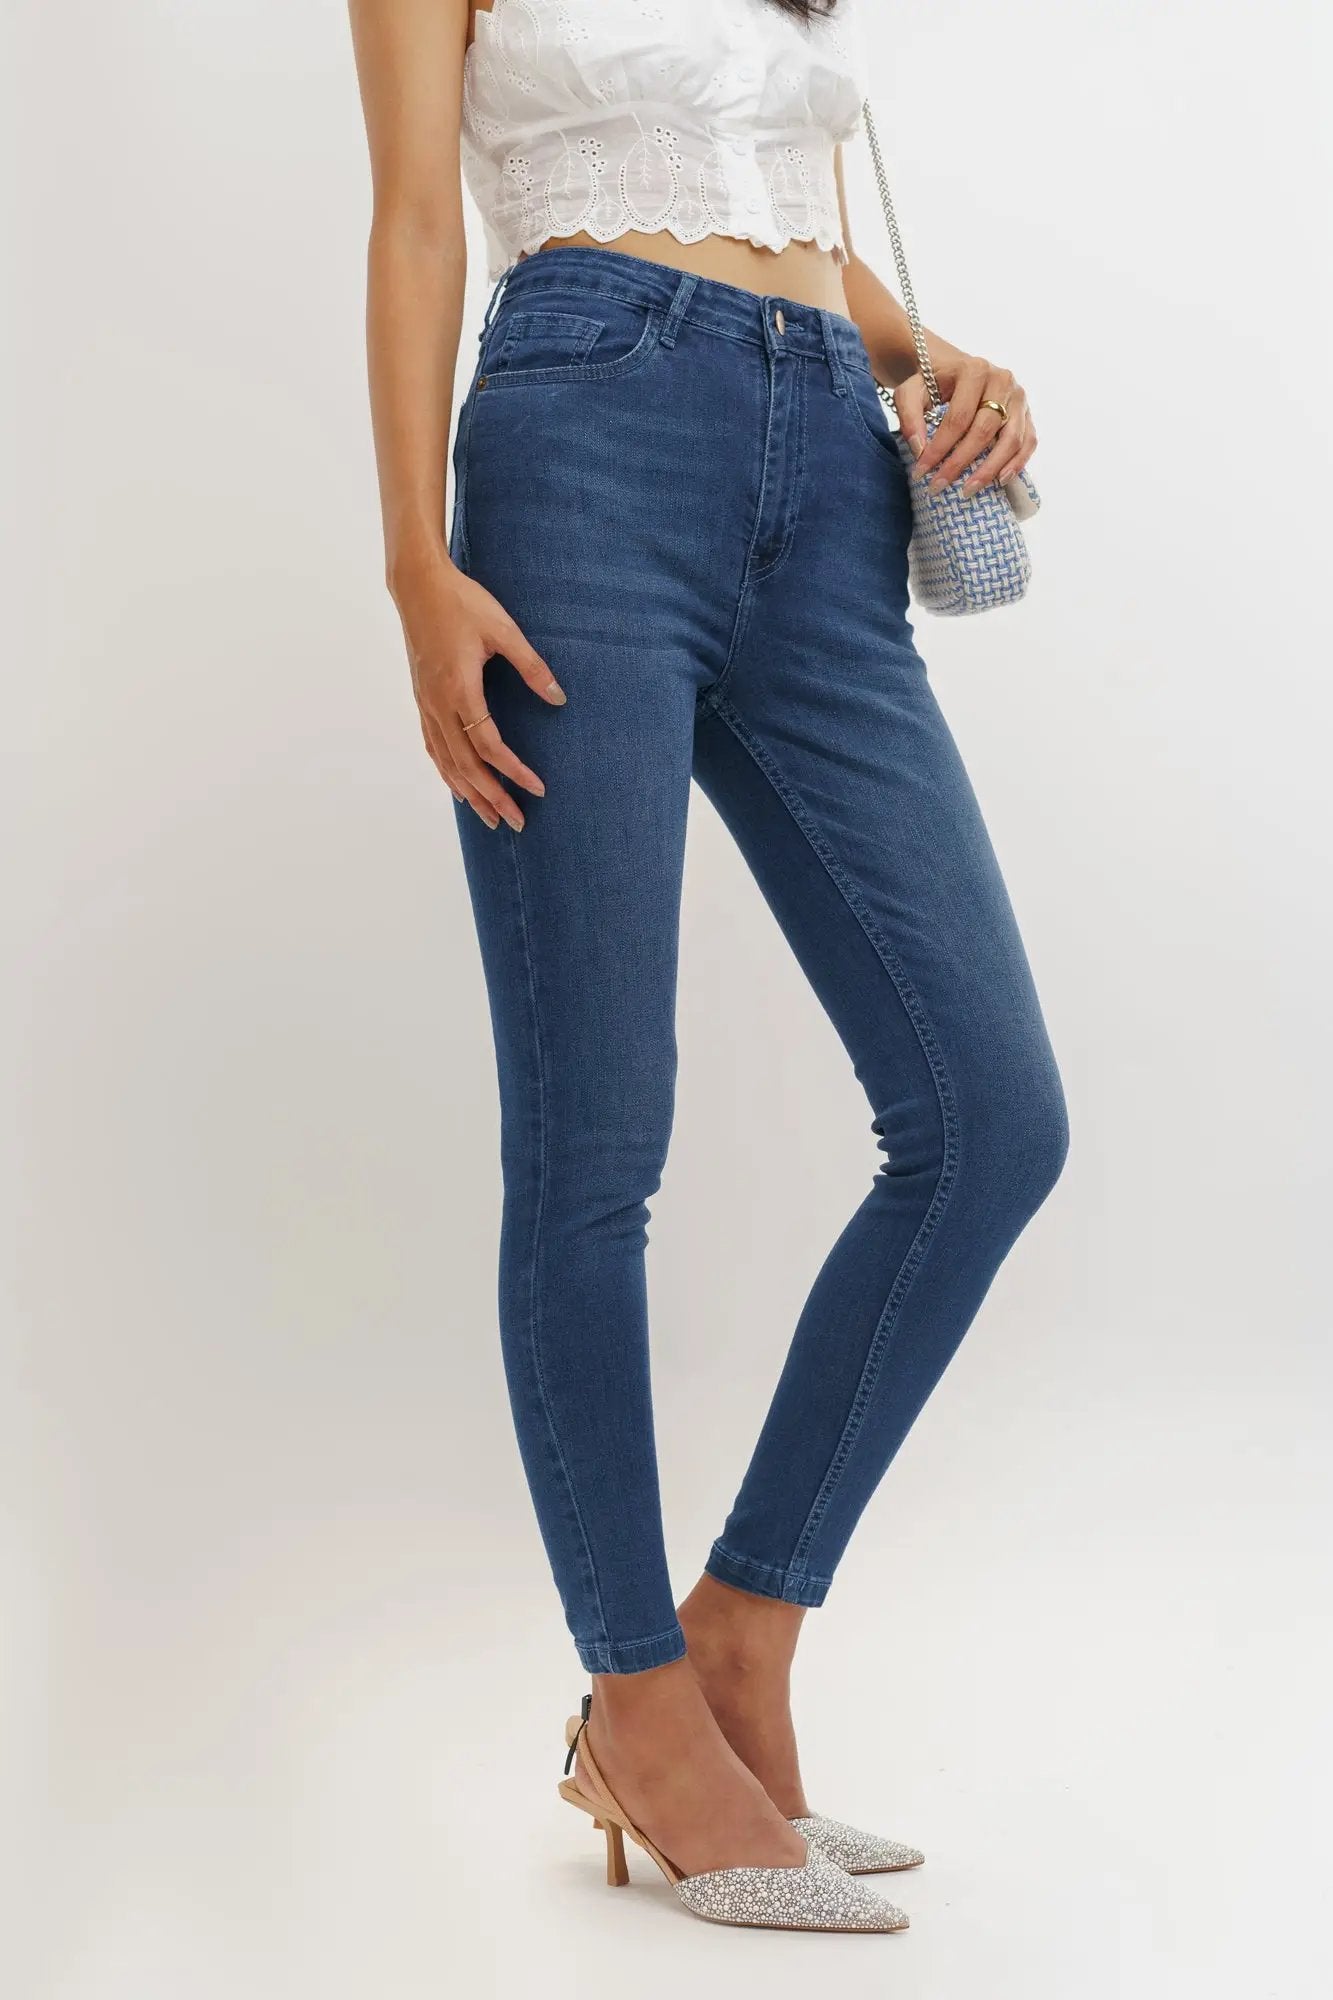 Blue Butterfly High Waist Jeans Pants For Women Summer Hip Lifting, Tight  Fitting, And Stretchy For Womens Fashion Streetwear 90s From Bai05, $32.29